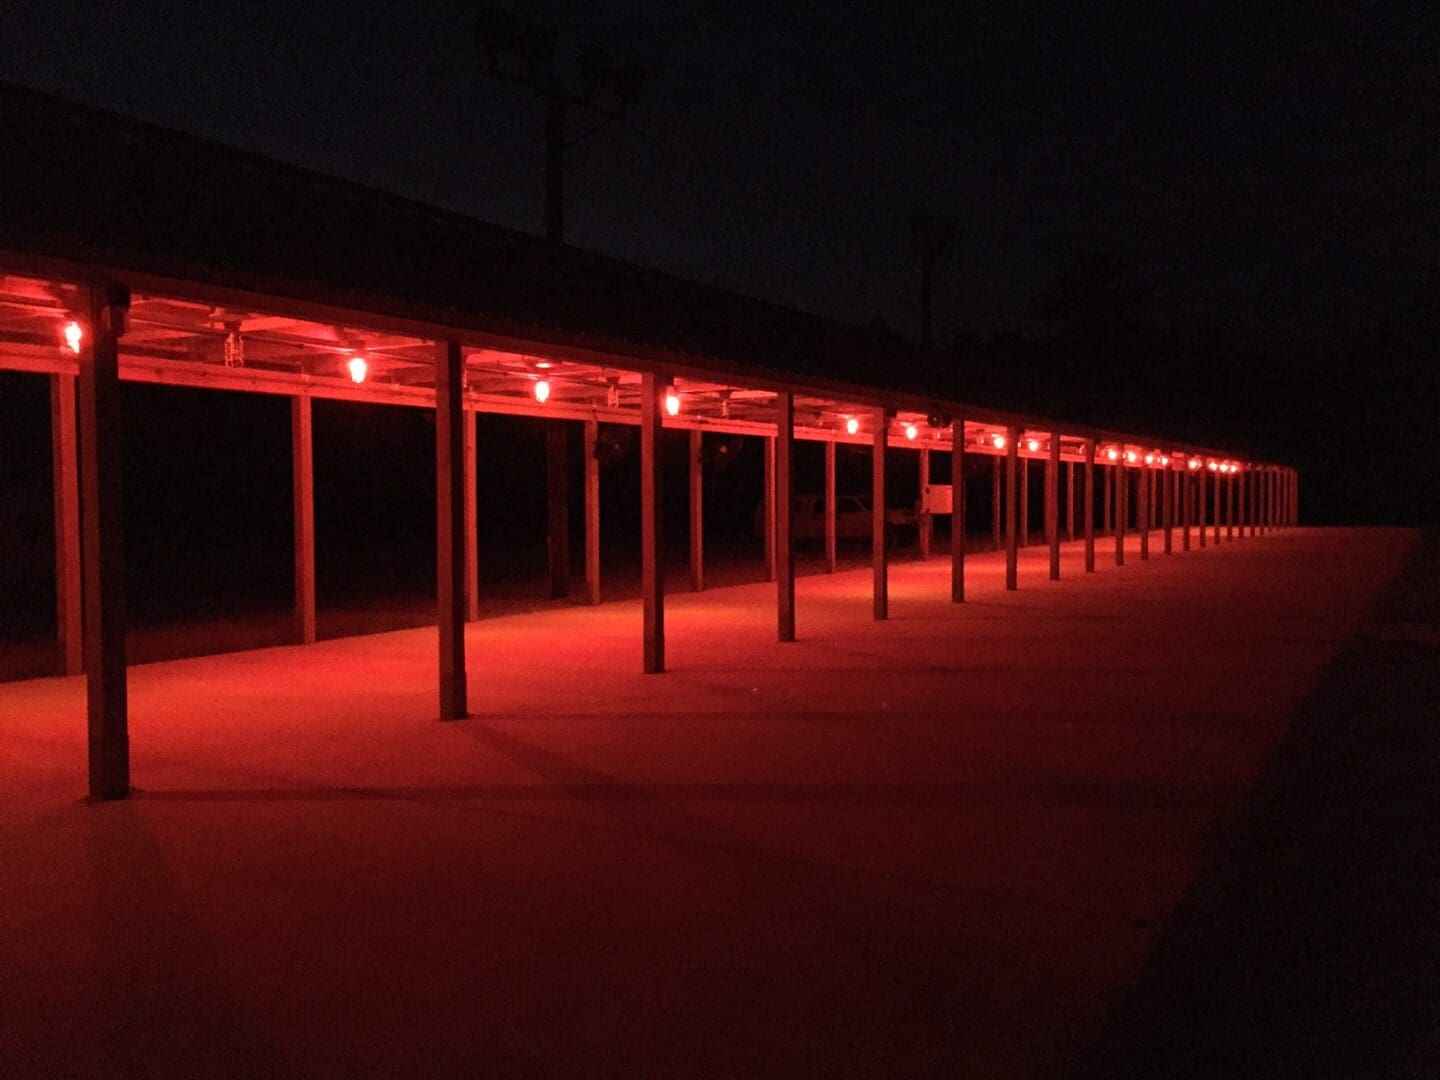 A row of outdoor structures illuminated by red lights at night.